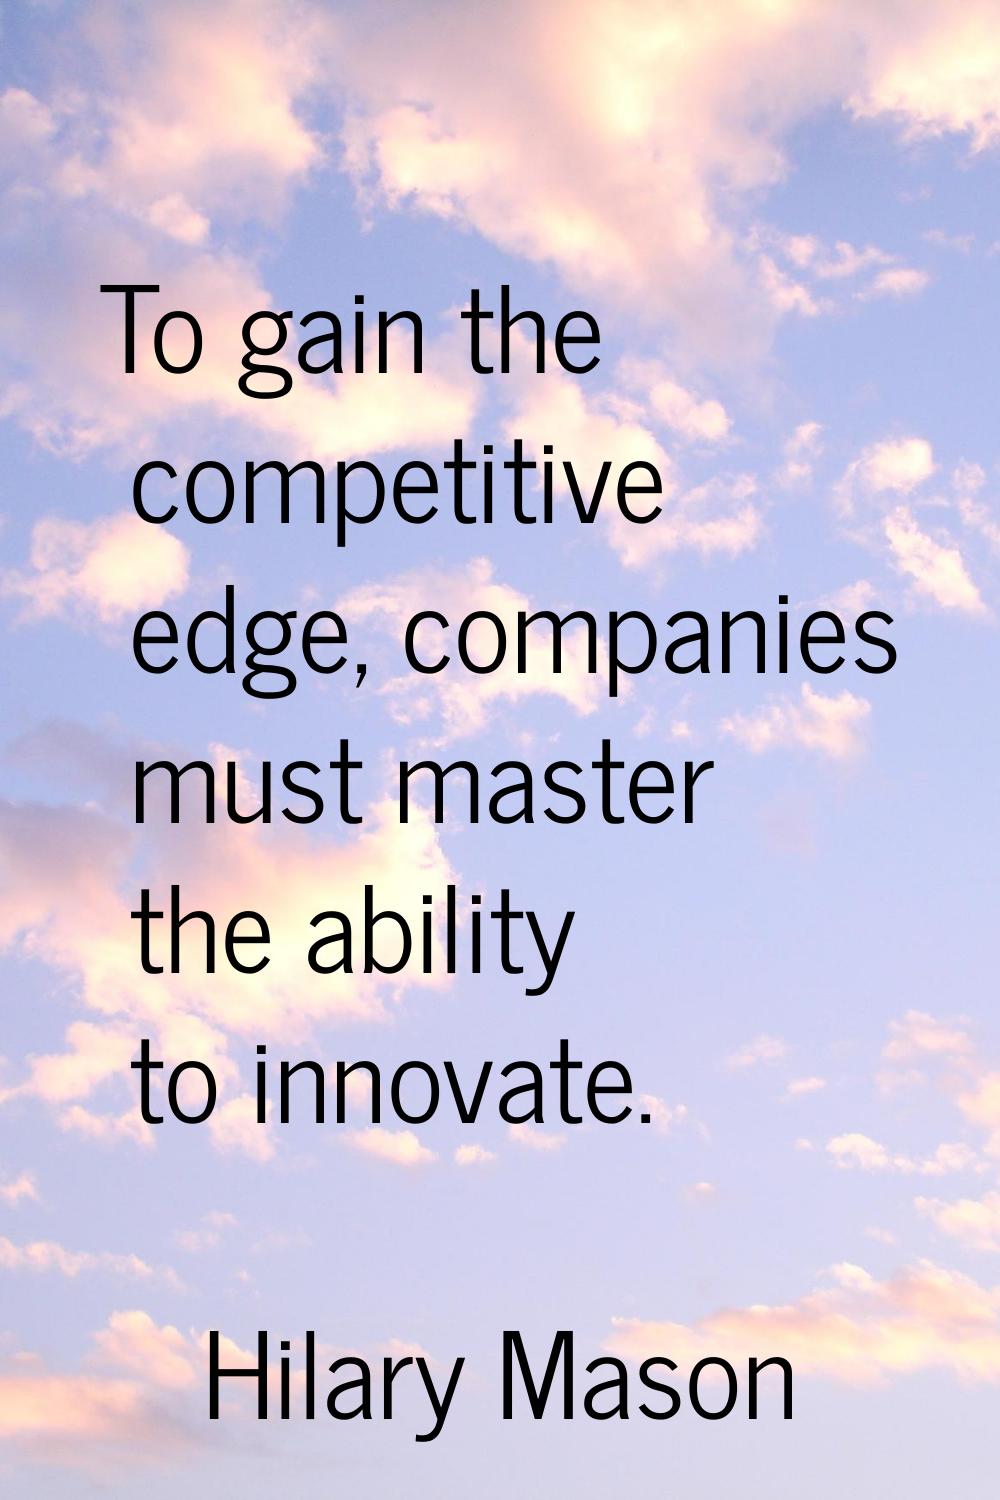 To gain the competitive edge, companies must master the ability to innovate.